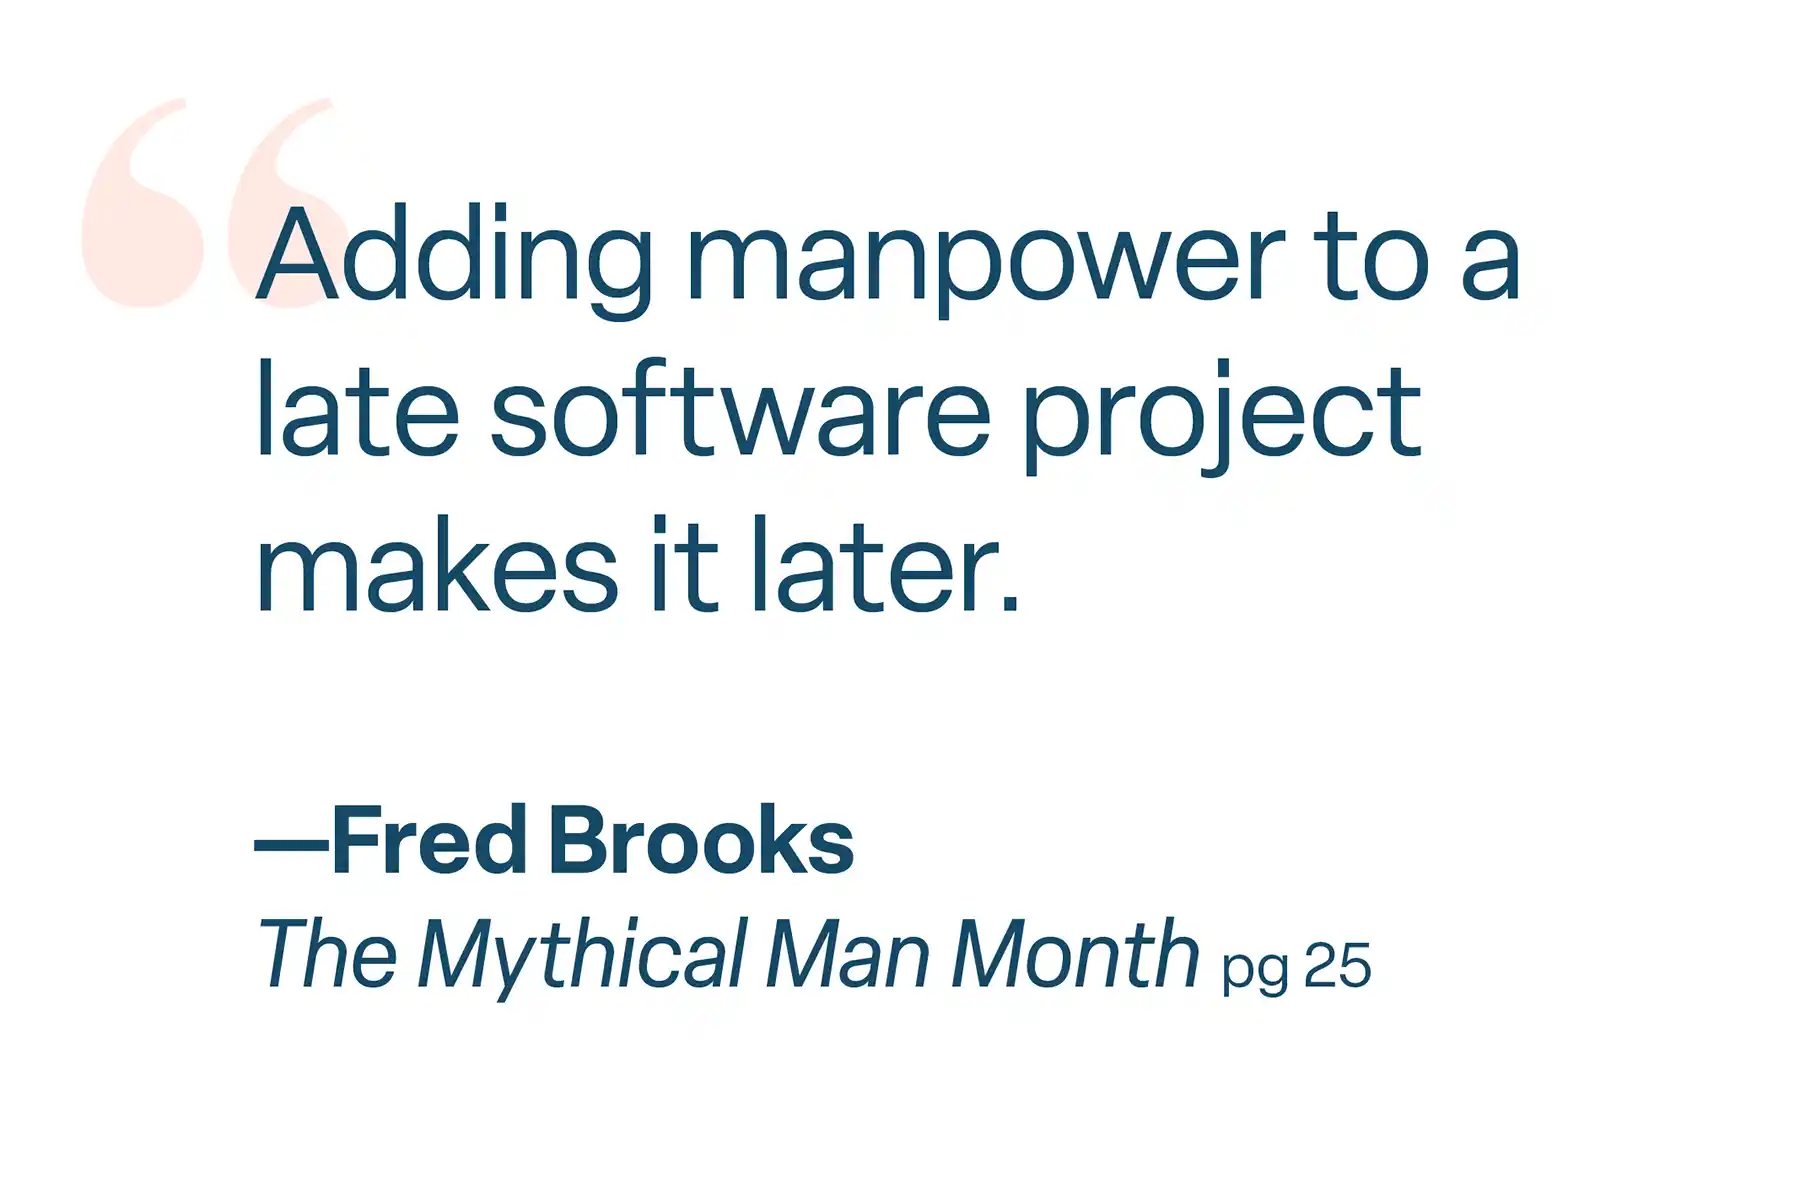 Large text graphic of the Fred Brooks quote: "Adding manpower to a late software project makes it later."